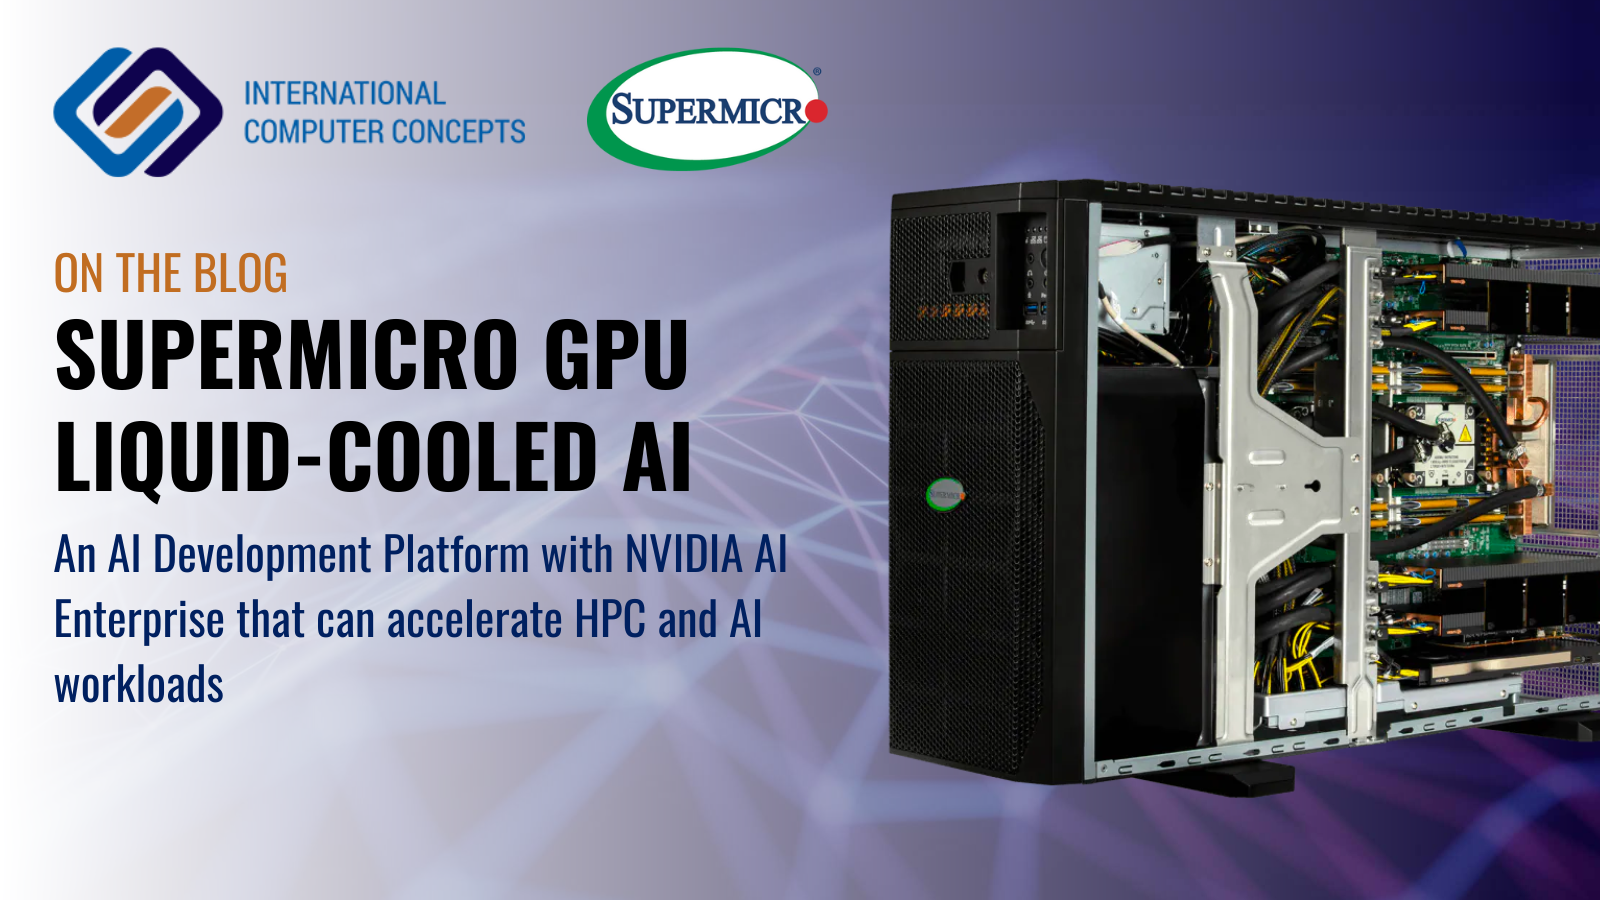 SuperMicro announce expanded GPU solutions with Liquid-Cooled AI Development Platform